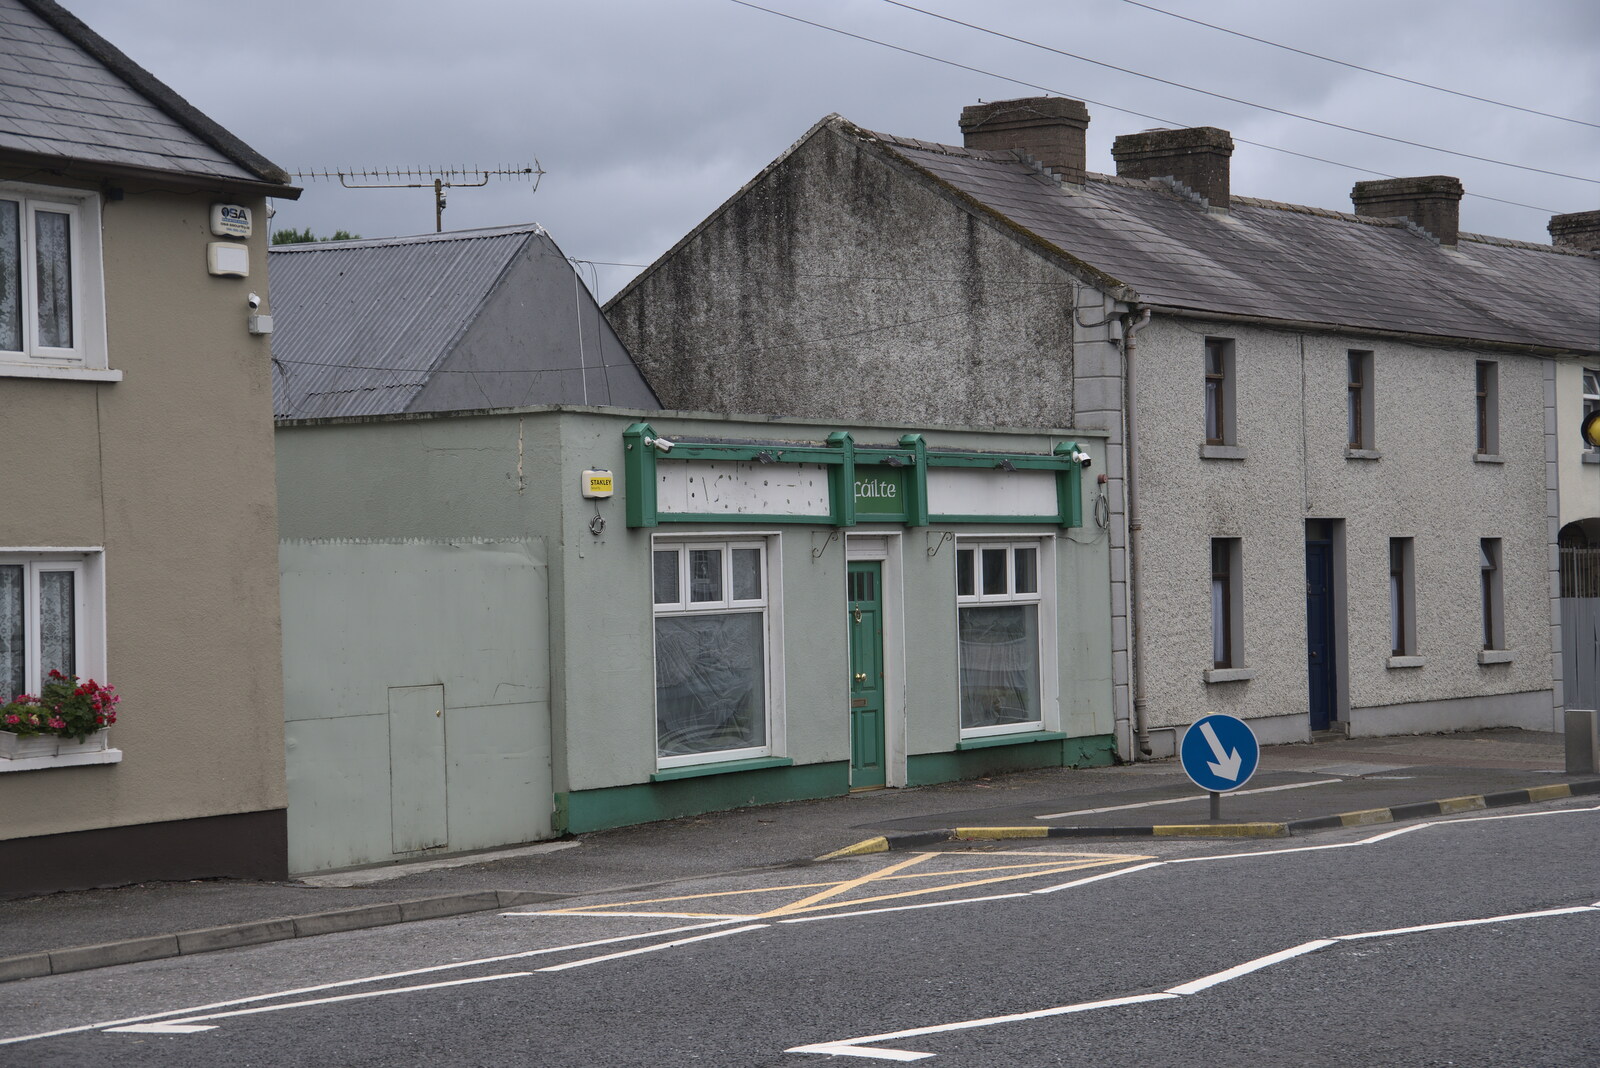 Pints of Guinness and Streedagh Beach, Grange and Sligo, Ireland - 9th August 2021: The remains of a derelict bar